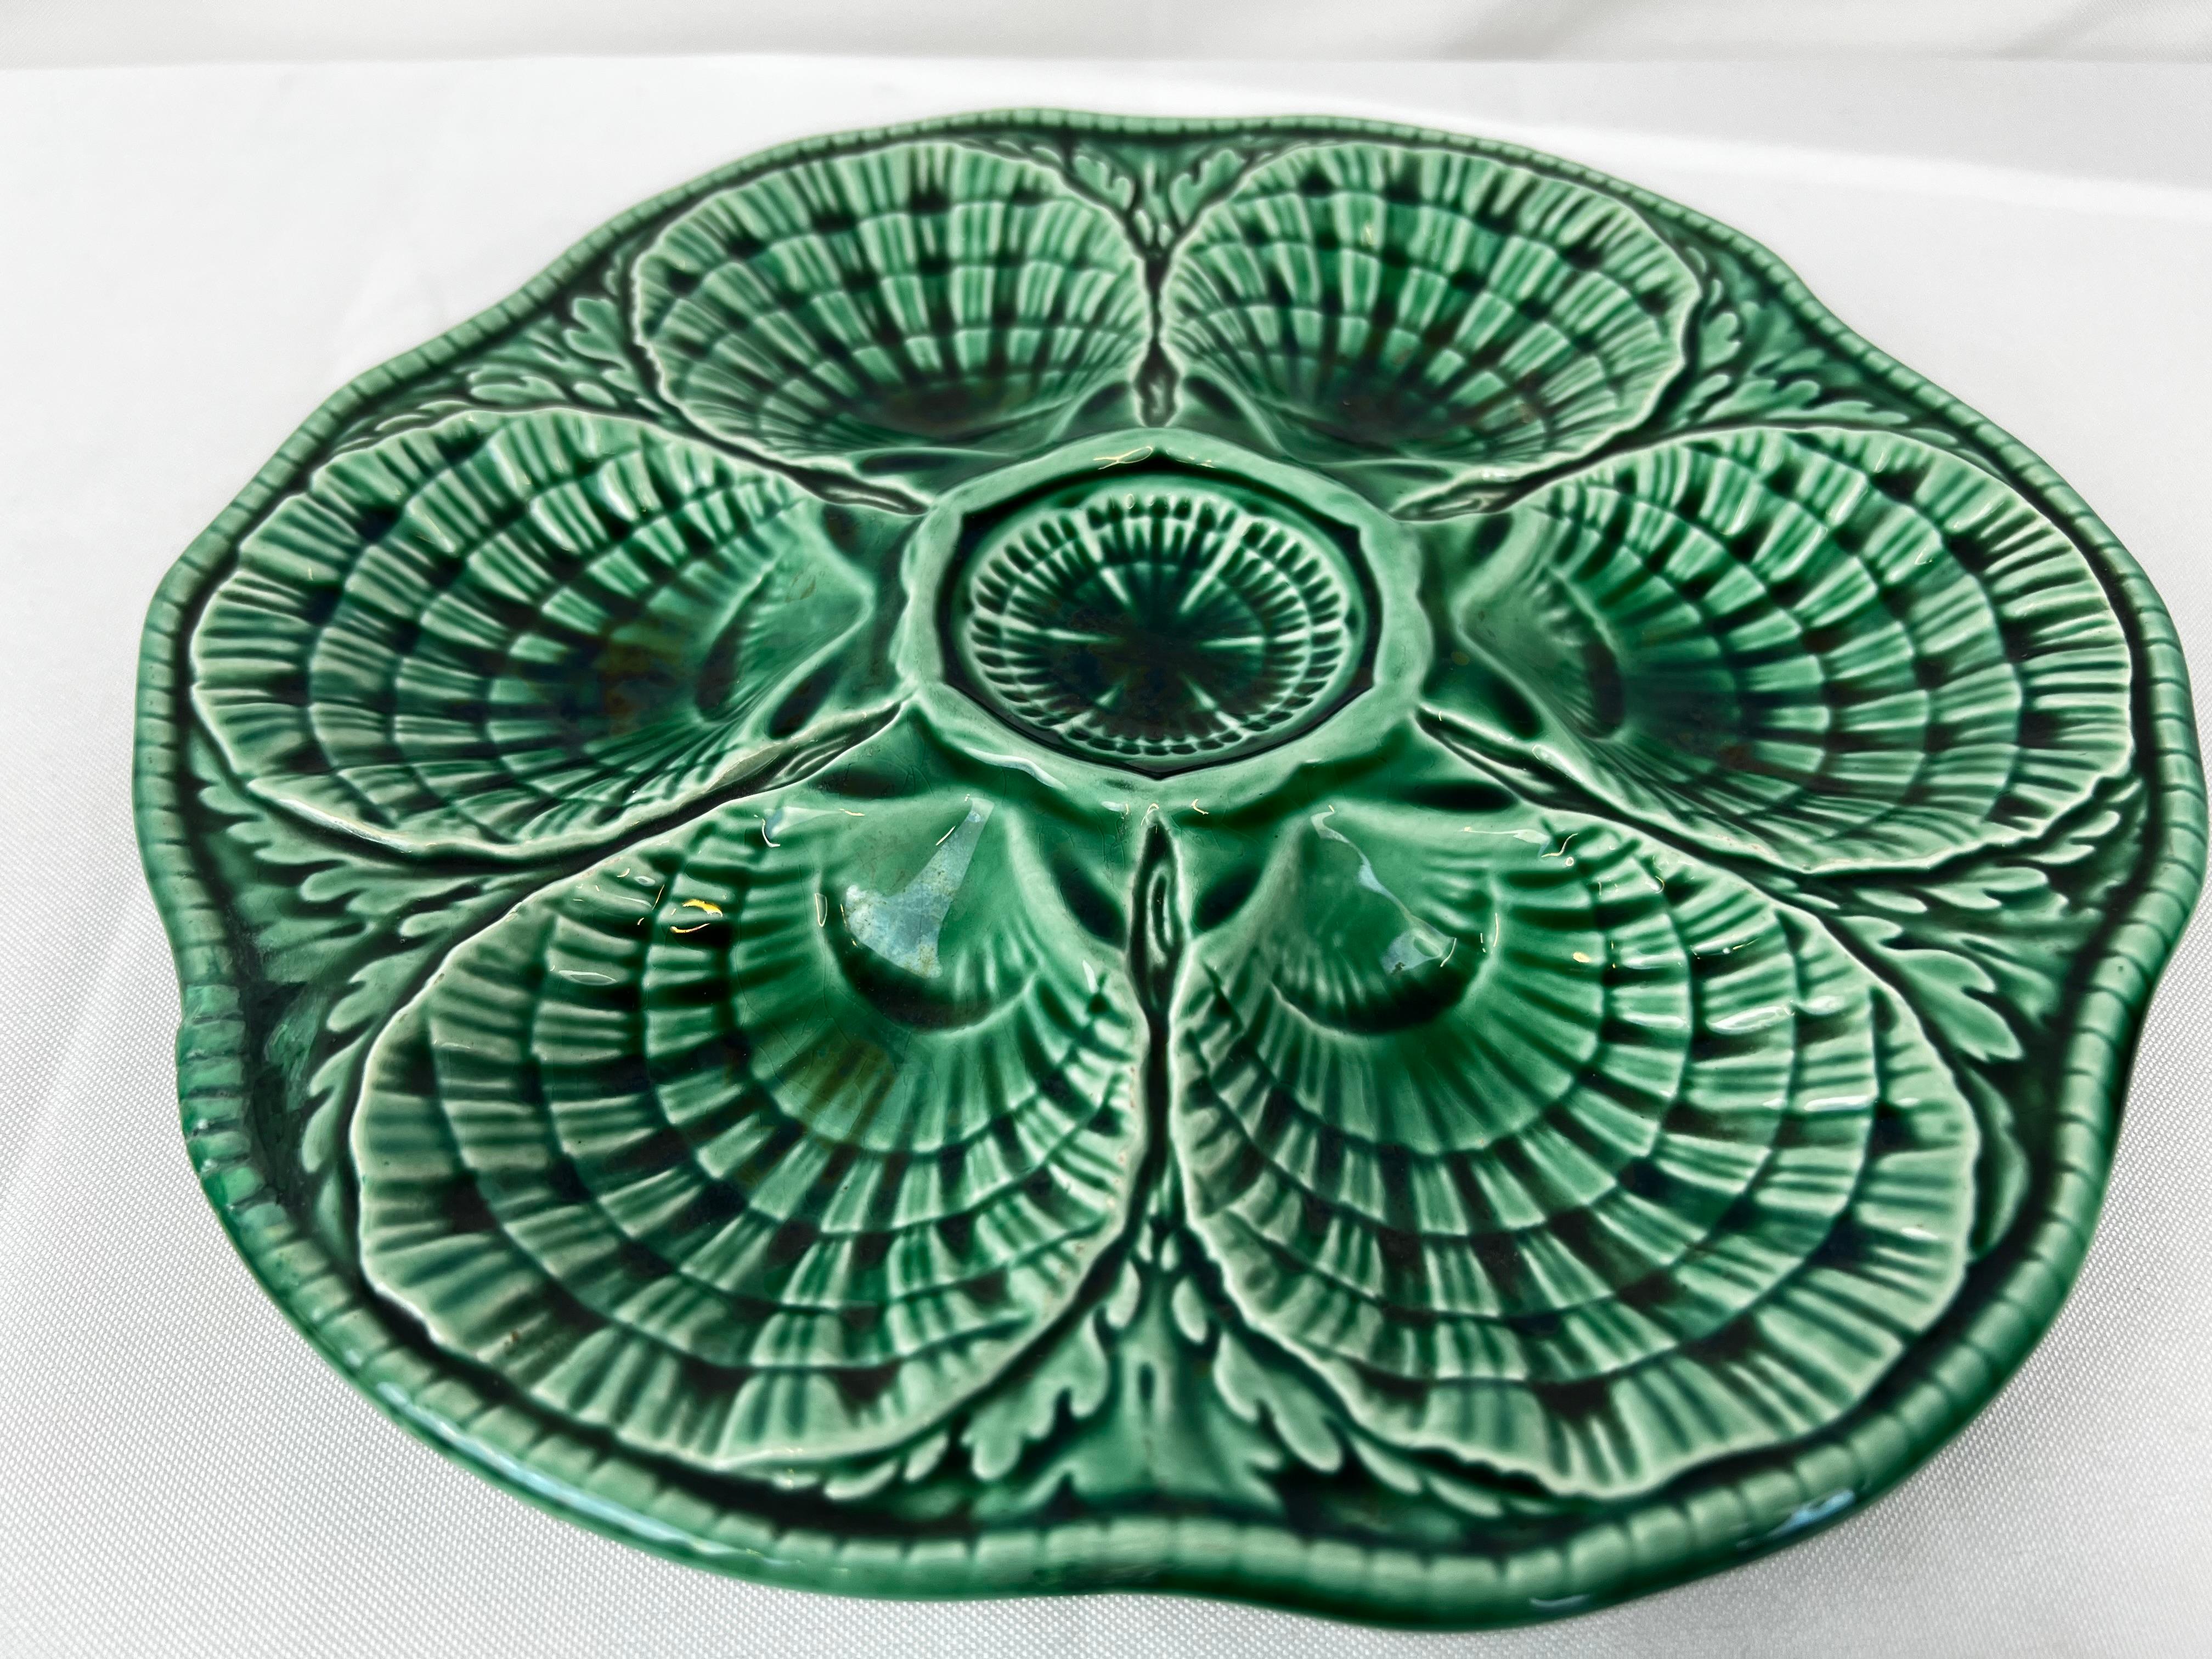 Majolica oyster plate in a rich Ming green coloration.  Sarreguemines, a prolific ceramics company in France, created this plate in the 1930’s.  It could hold six large oysters with room in the center for a complimentary sauce/spice/lemon.  The